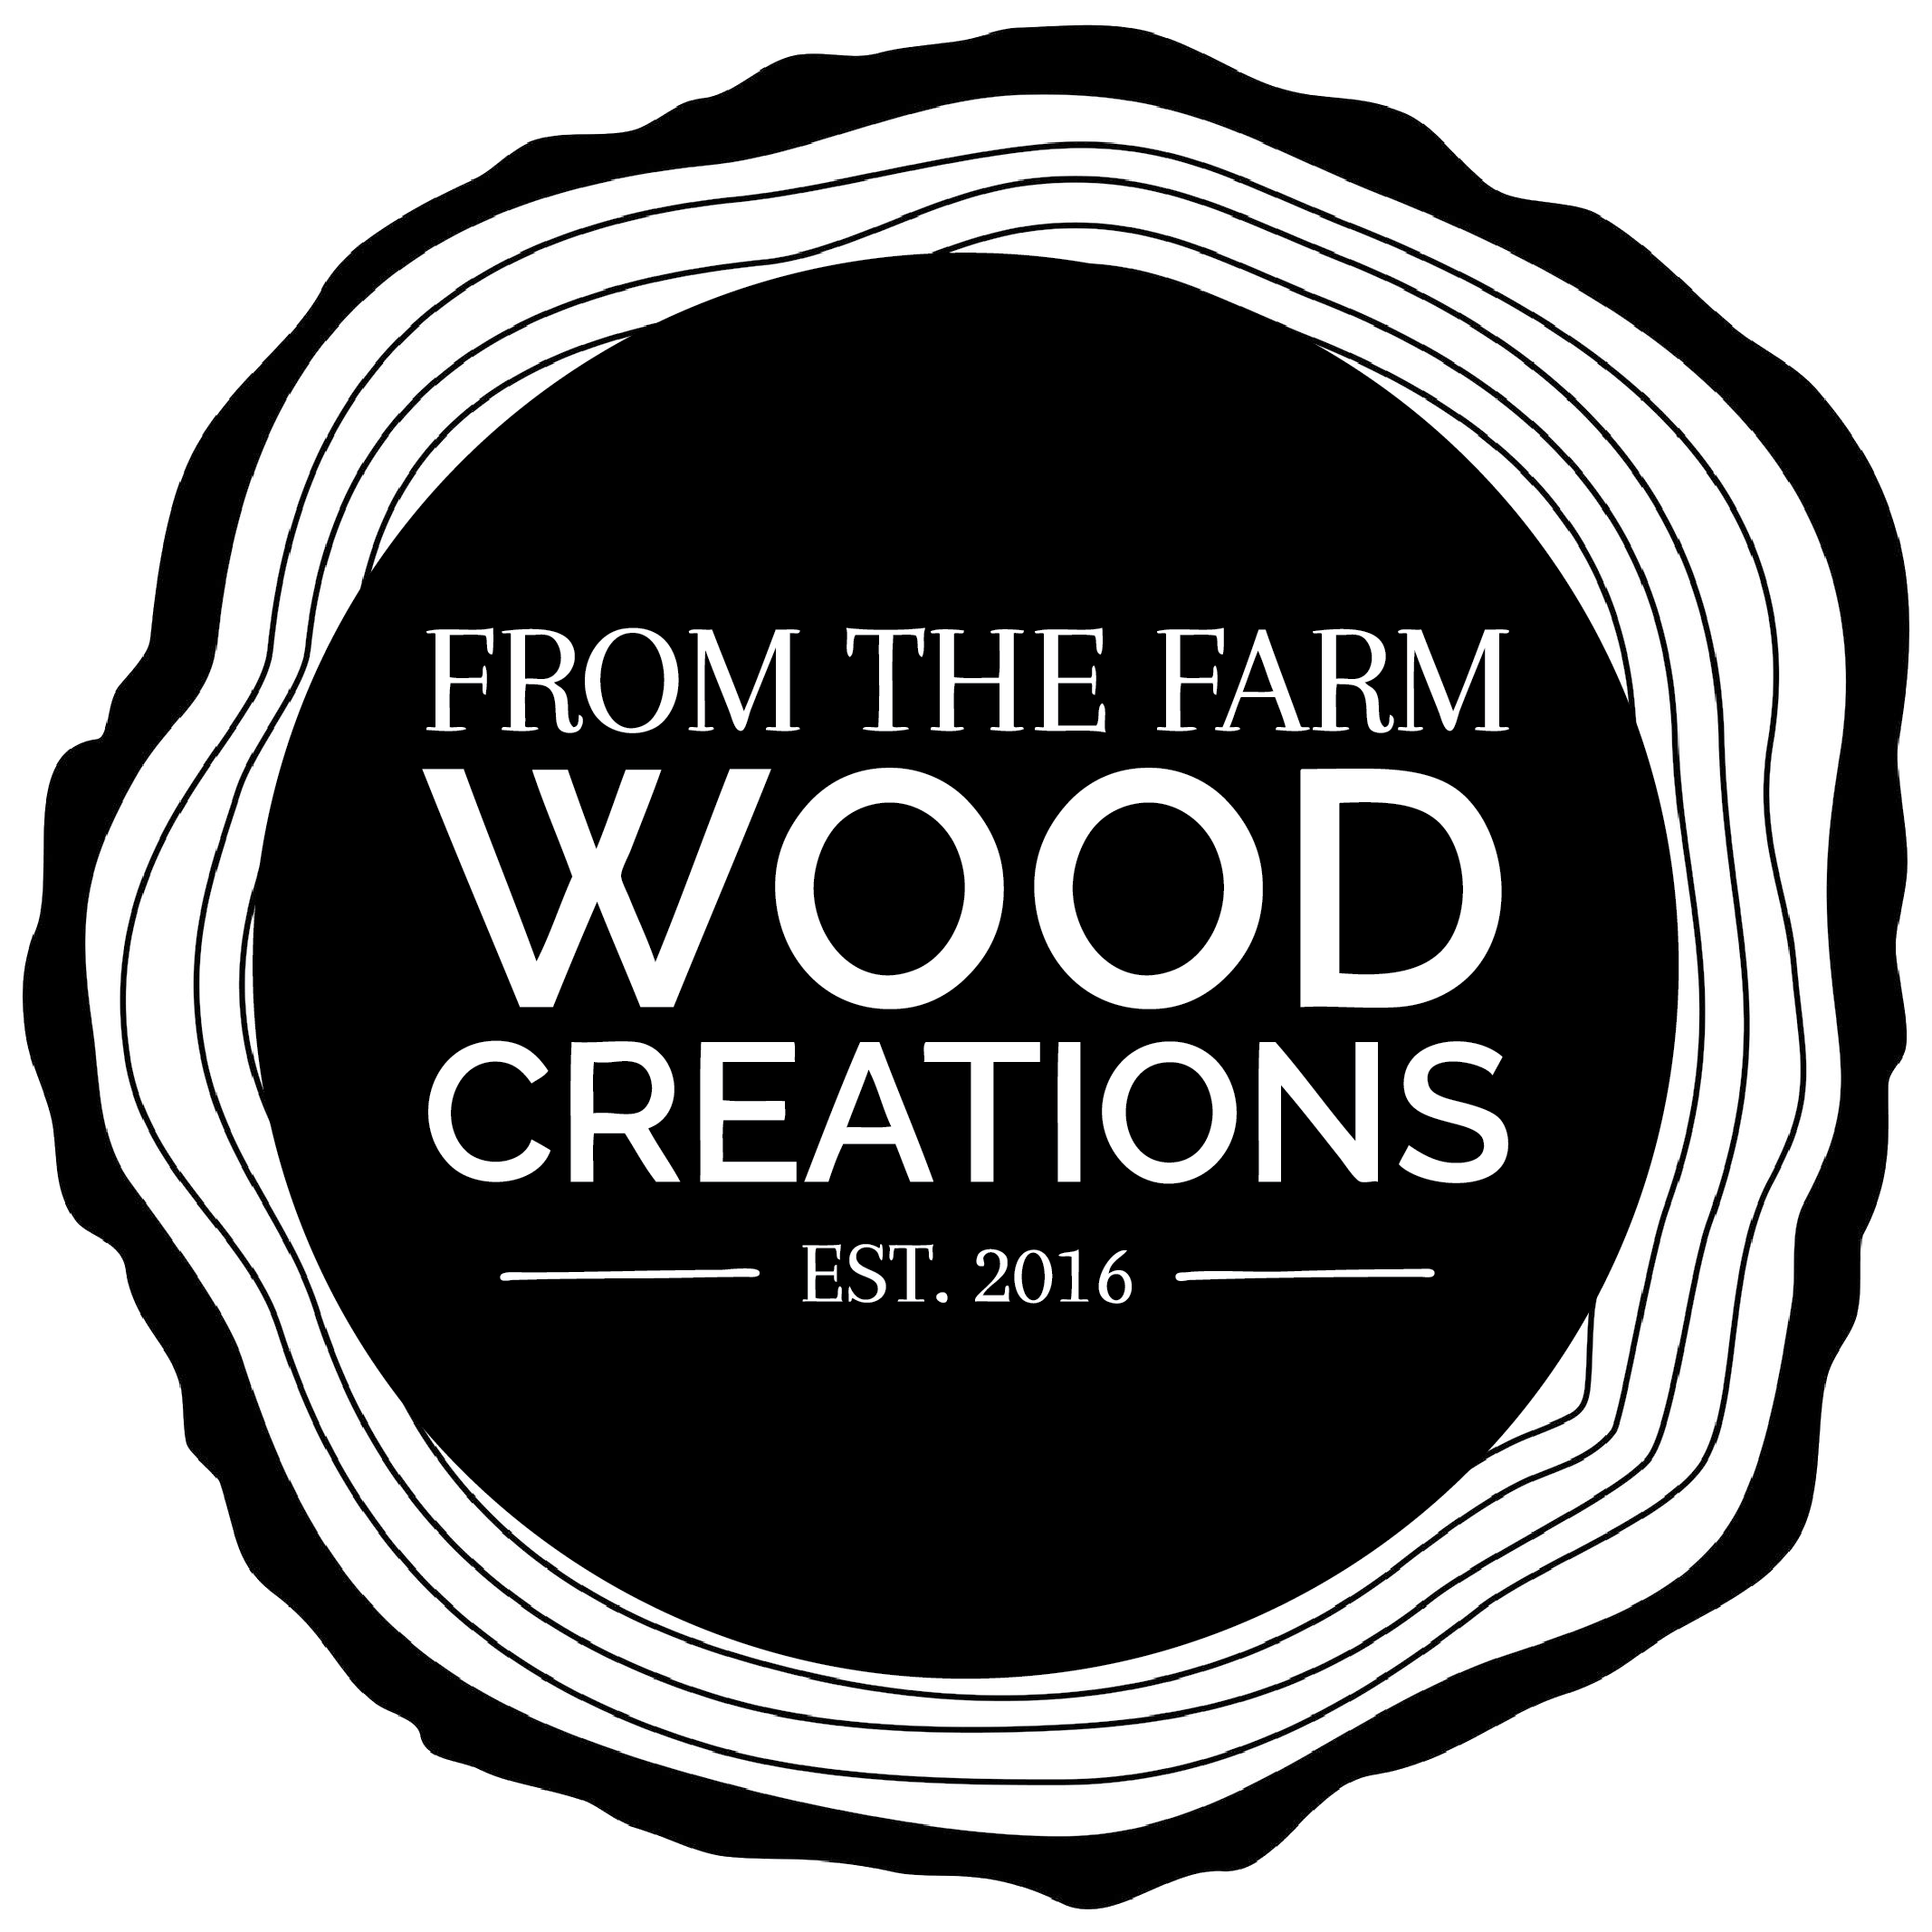 From the Farm Wood Creations